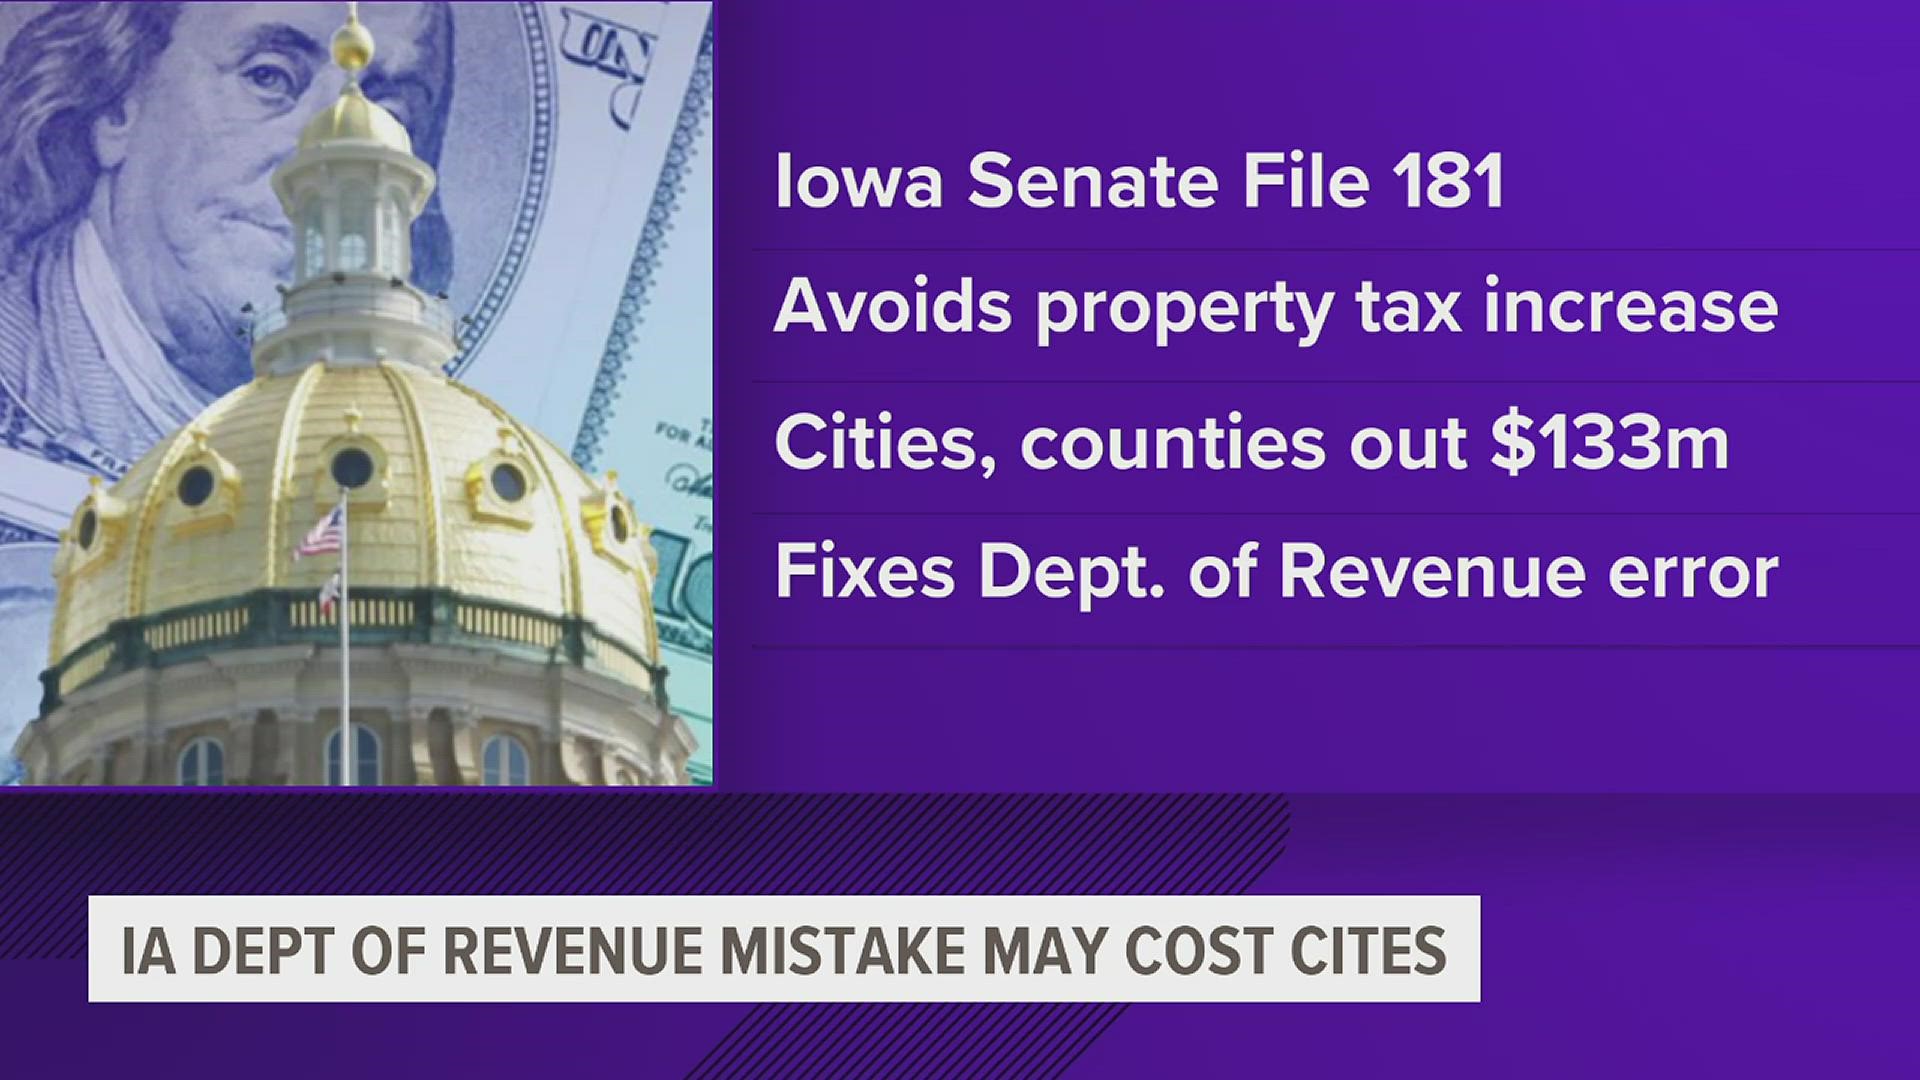 According to State Sen. Cindy Winckler, the change will reduce property tax revenue by up to $133 million, which is causing cities to scramble for budget adjustments